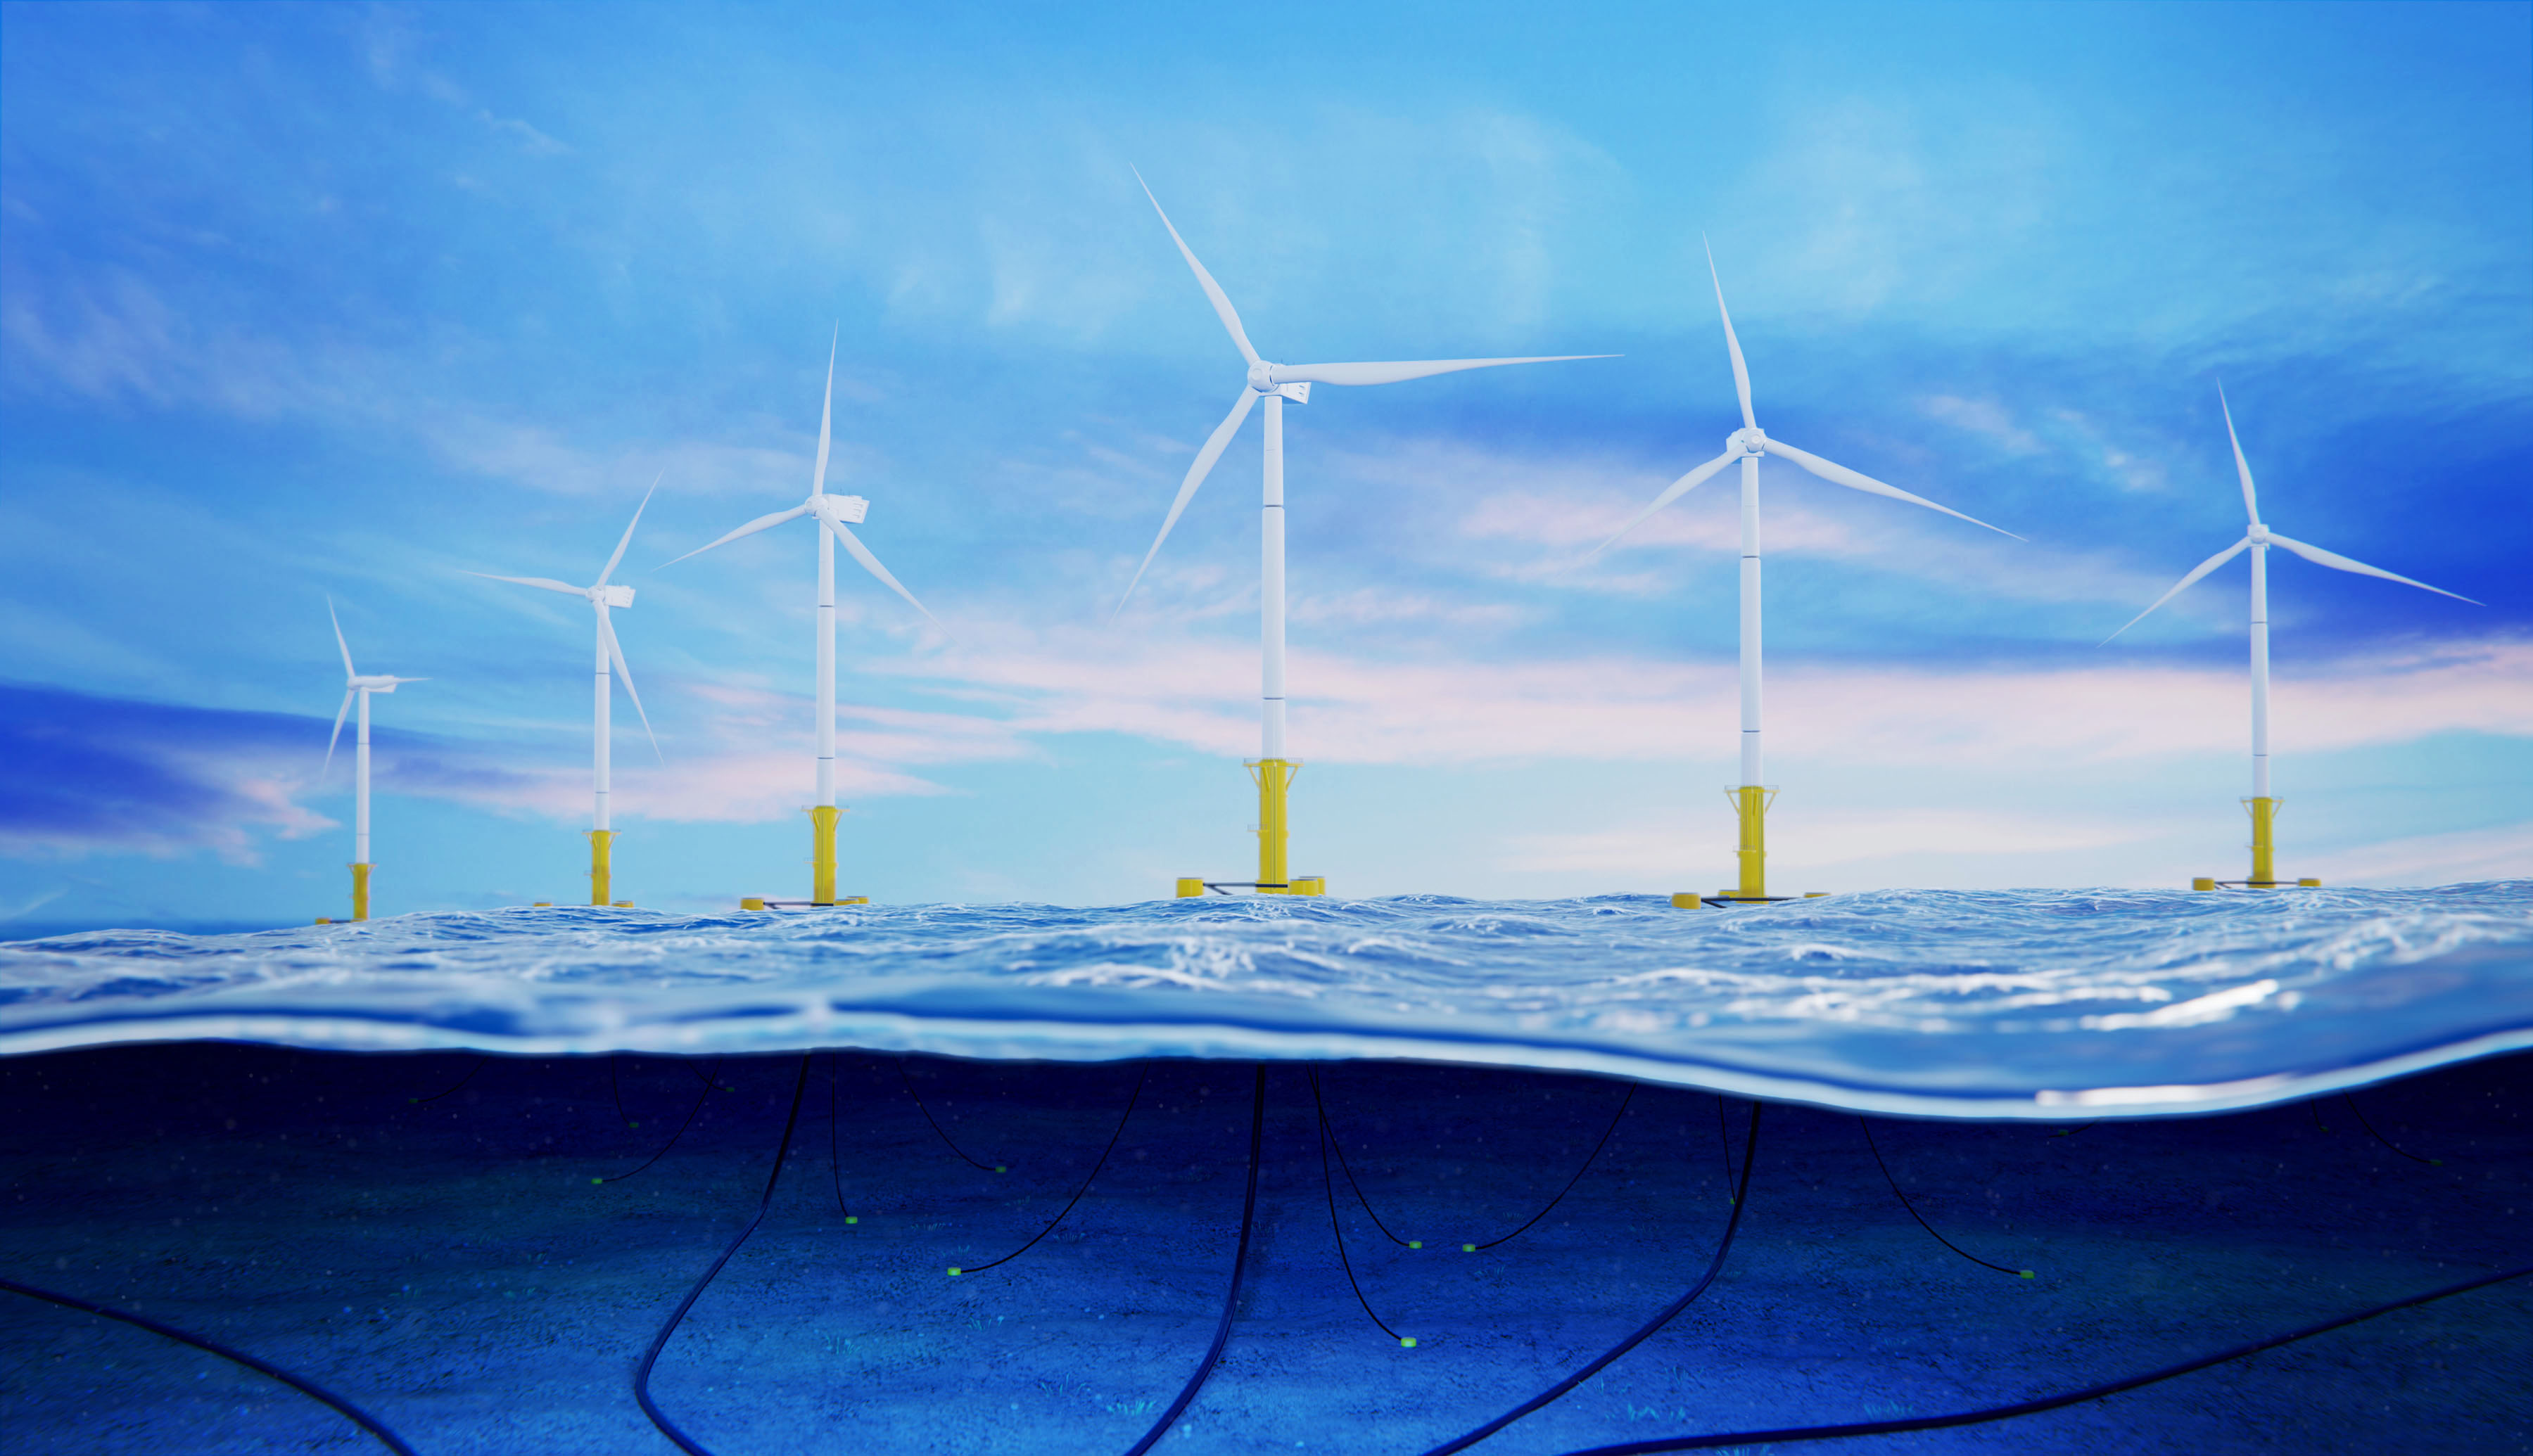 Digital image showing above- and below-water views of a floating offshore wind farm.